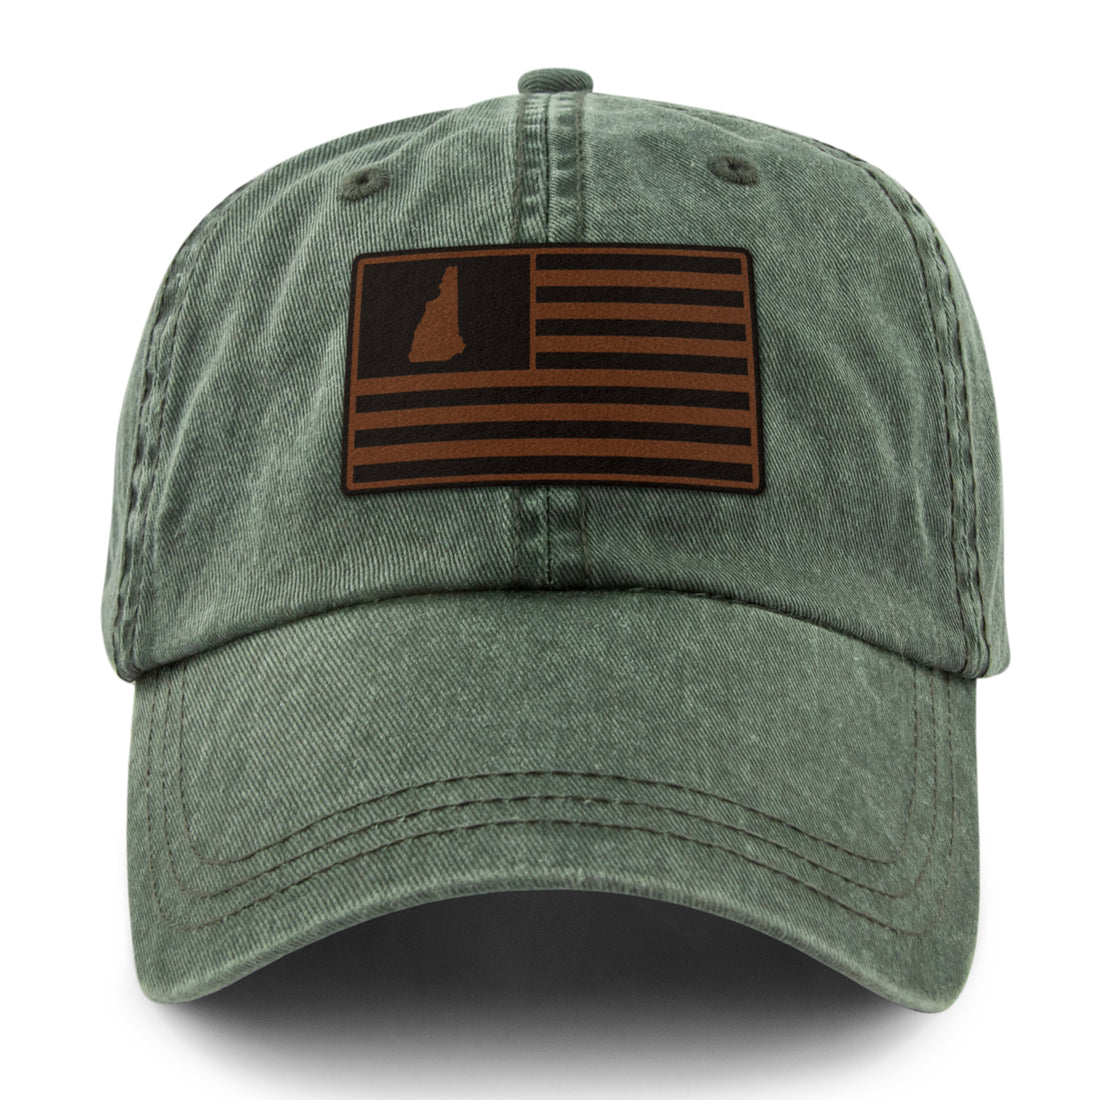 New Hampshire Striped Leather Patch Washed Dad Hat - Chowdaheadz